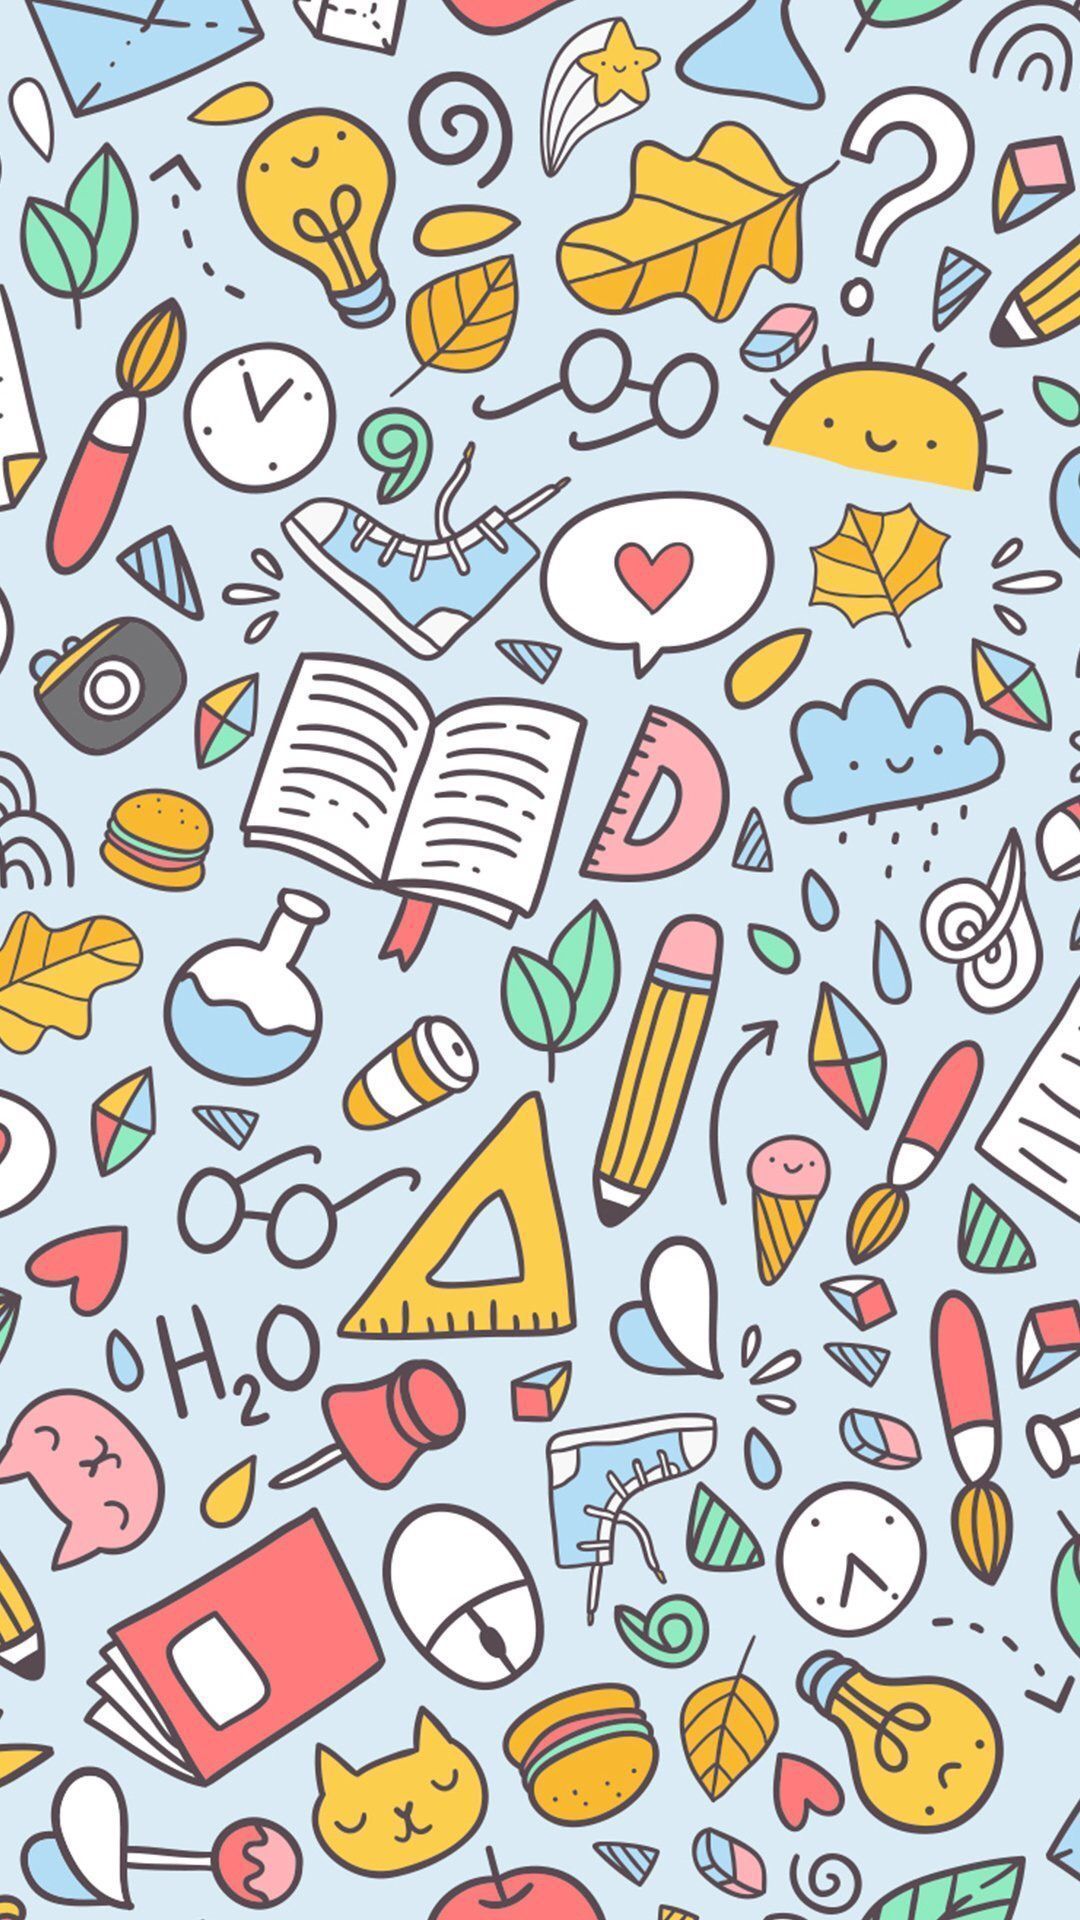 A cute wallpaper for your phone with school supplies - School